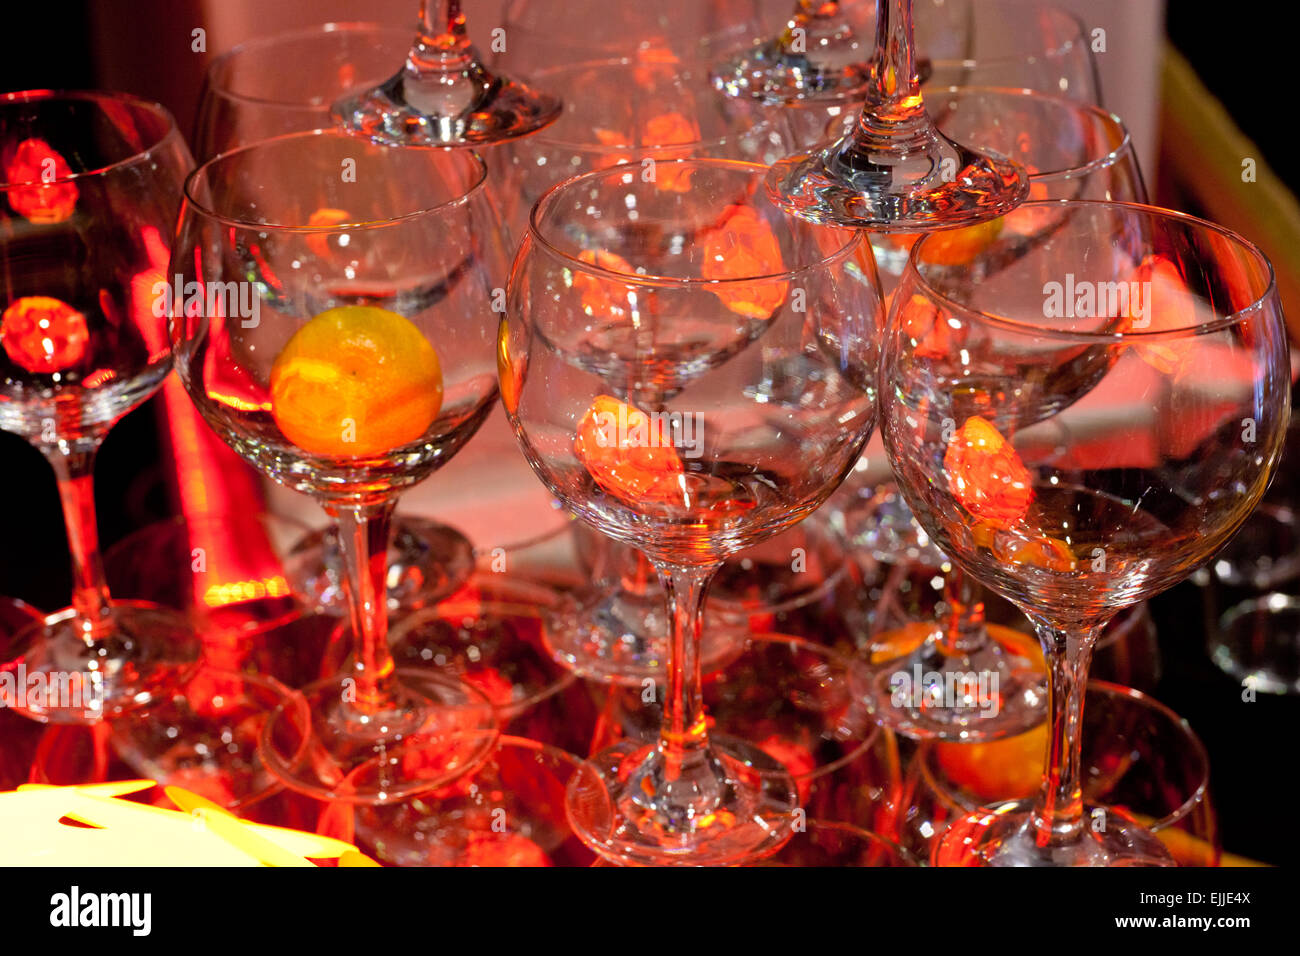 Lots of wine glasses with orange inside, prepared for serve in a bar Stock Photo